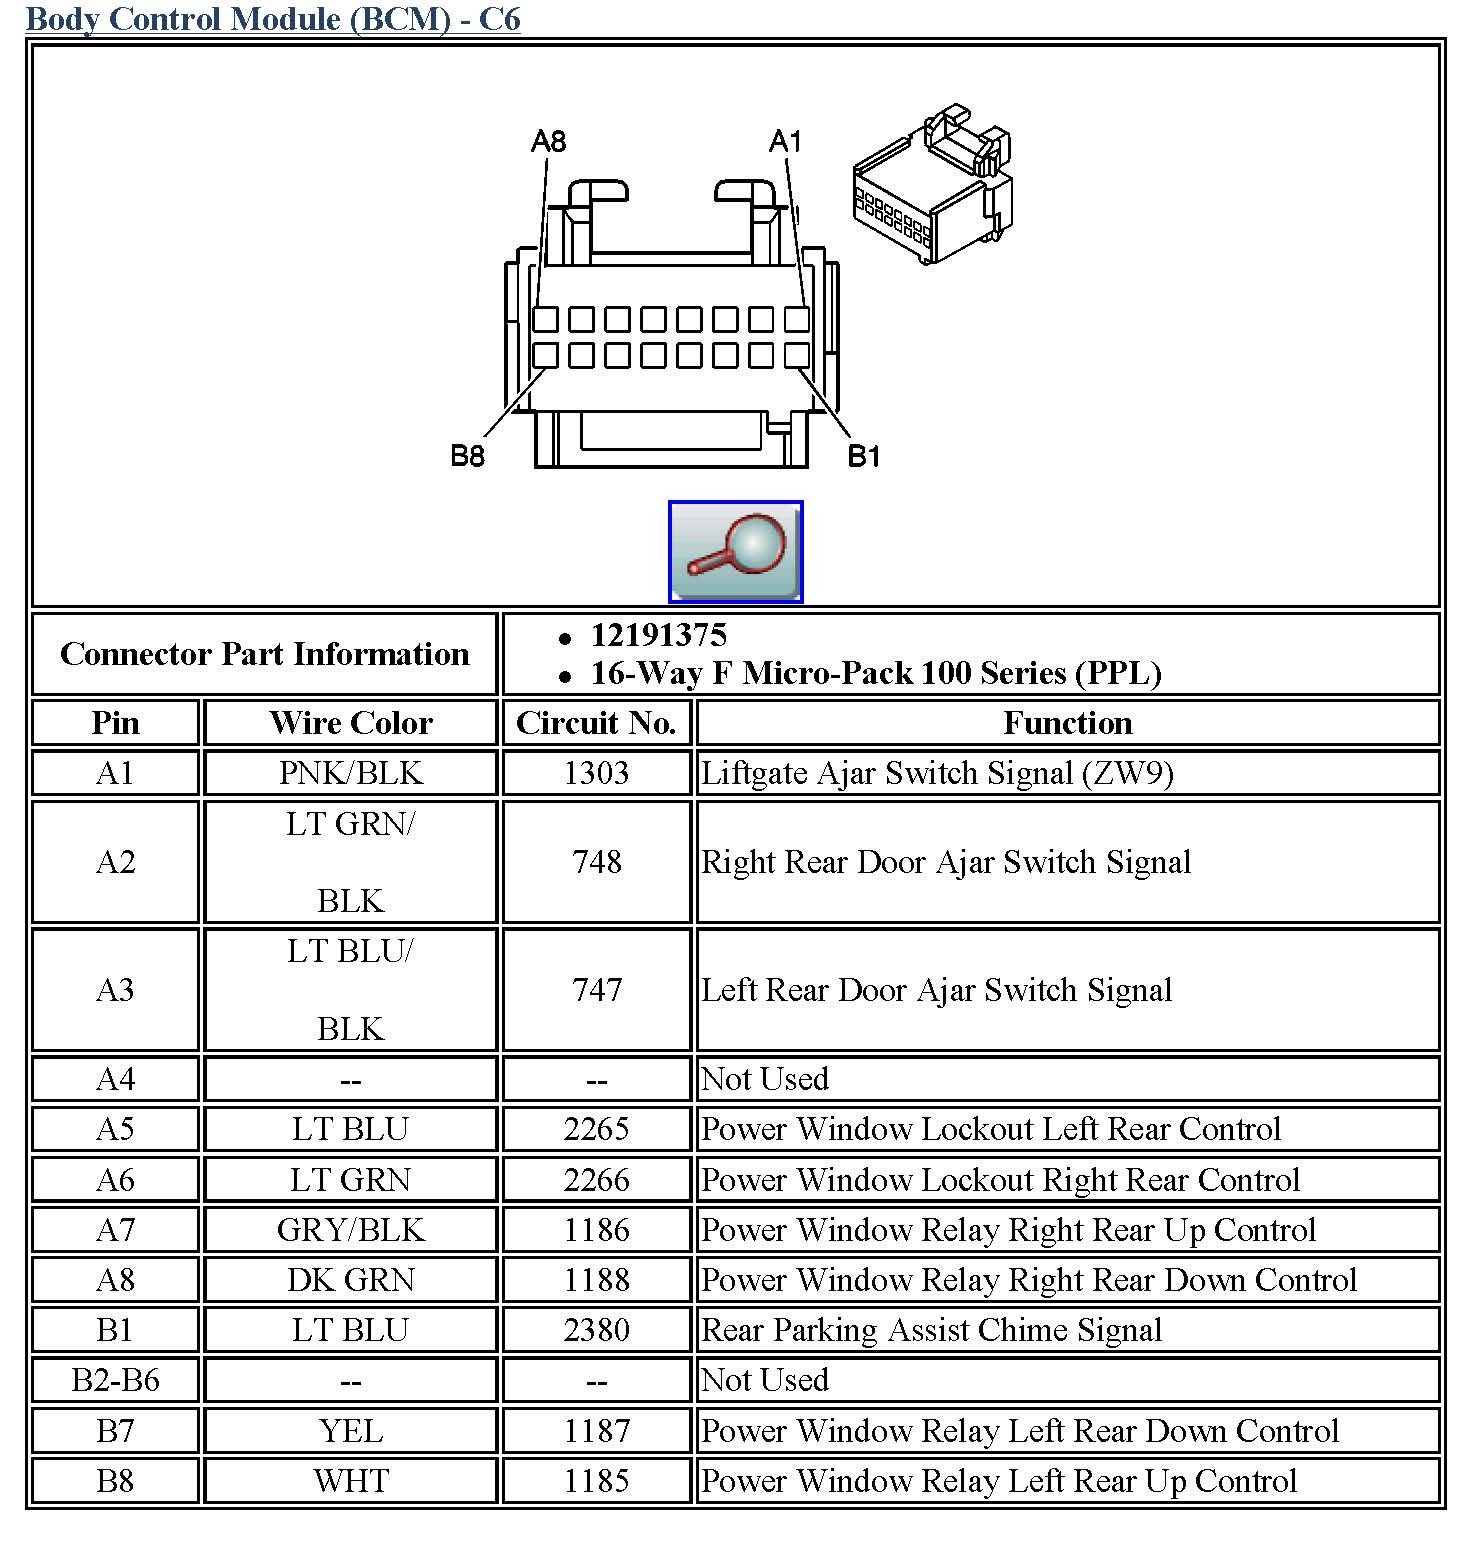 2007 Bmw Bcm Connections Diagram Gm Body Control Module Wiring Diagram Free Wiring Diagram Of 2007 Bmw Bcm Connections Diagram